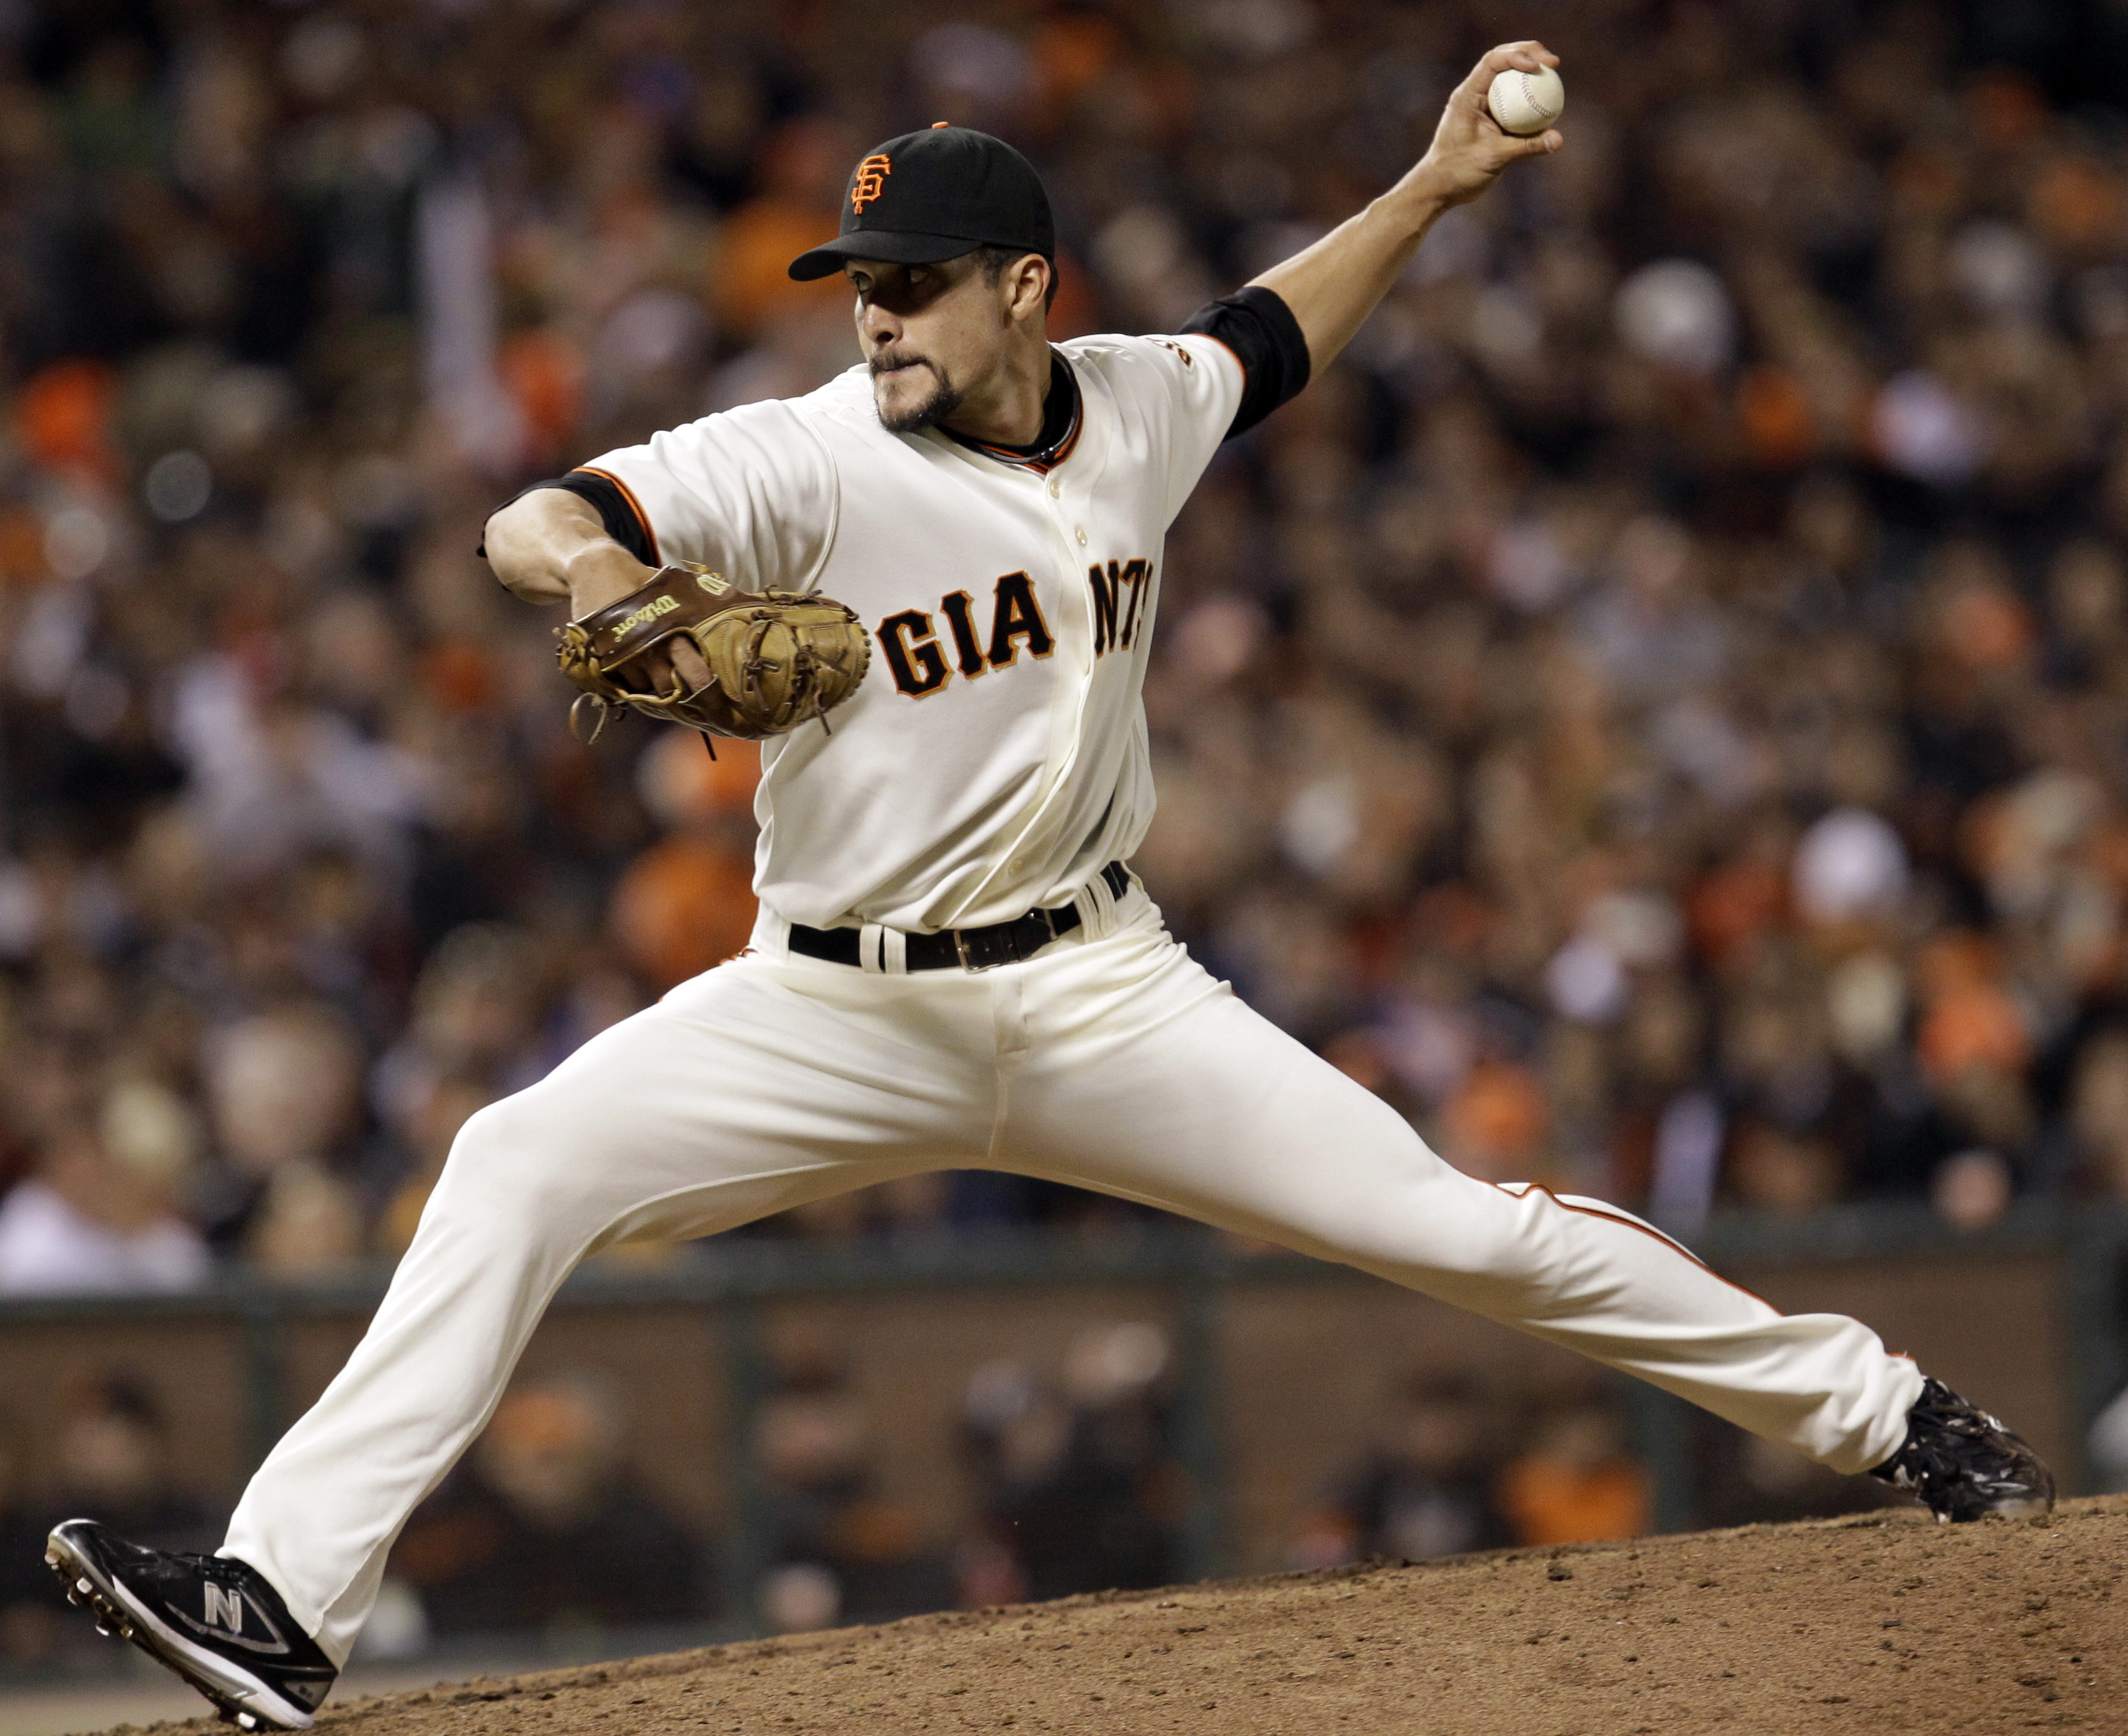 Giants reliever Lopez comes at batters from all angles